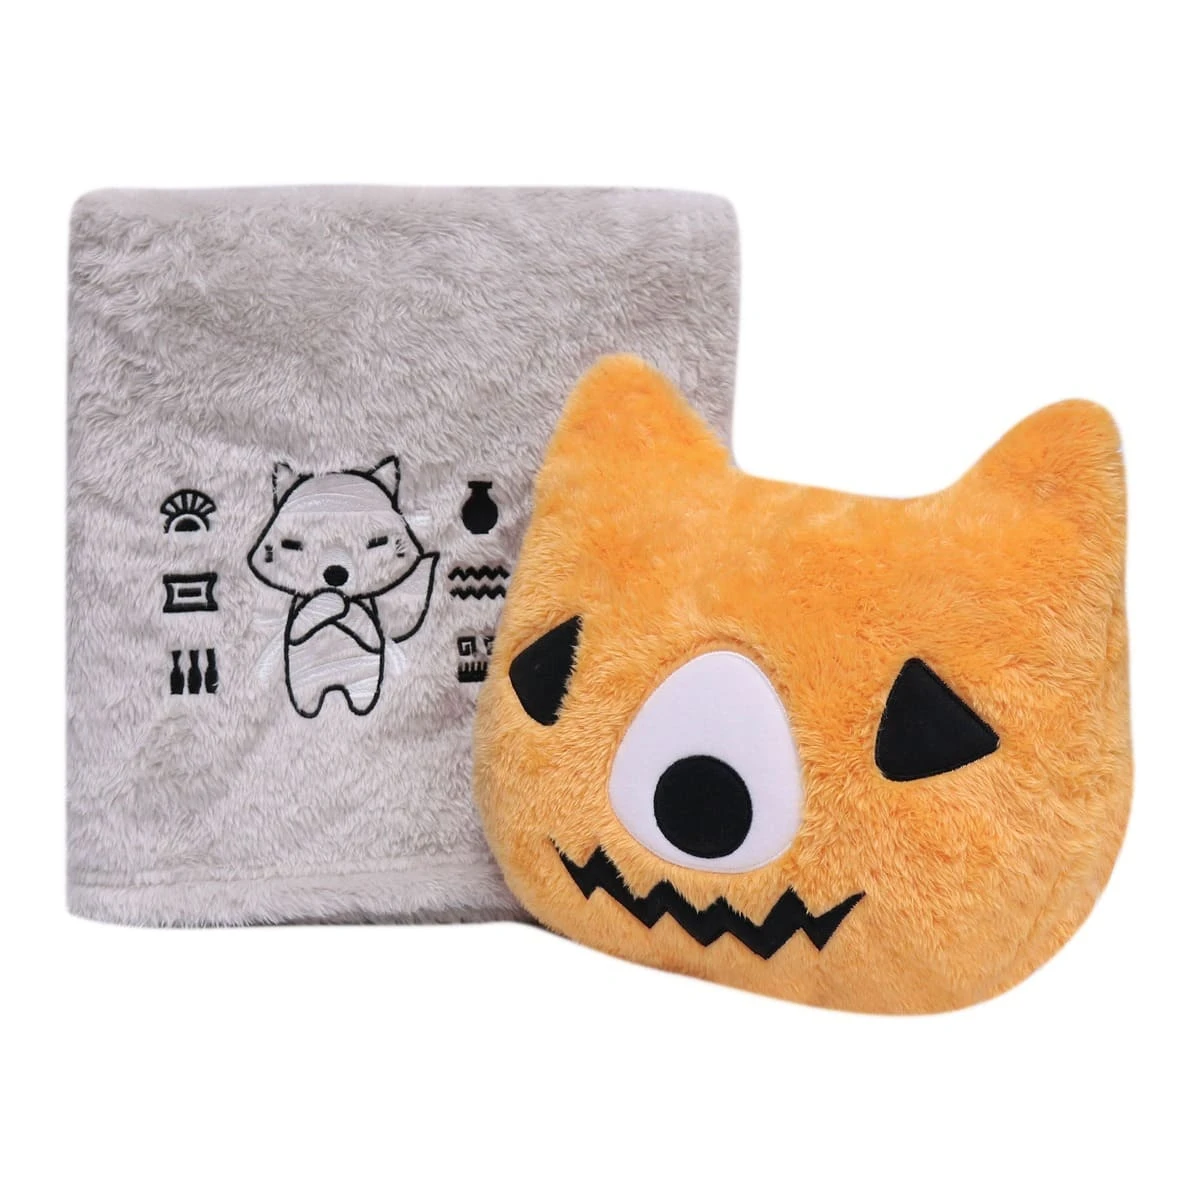 Terry V2 (Halloween Collection) 3D Embroidery Plush Pillow Blanket (Orange,Grey)